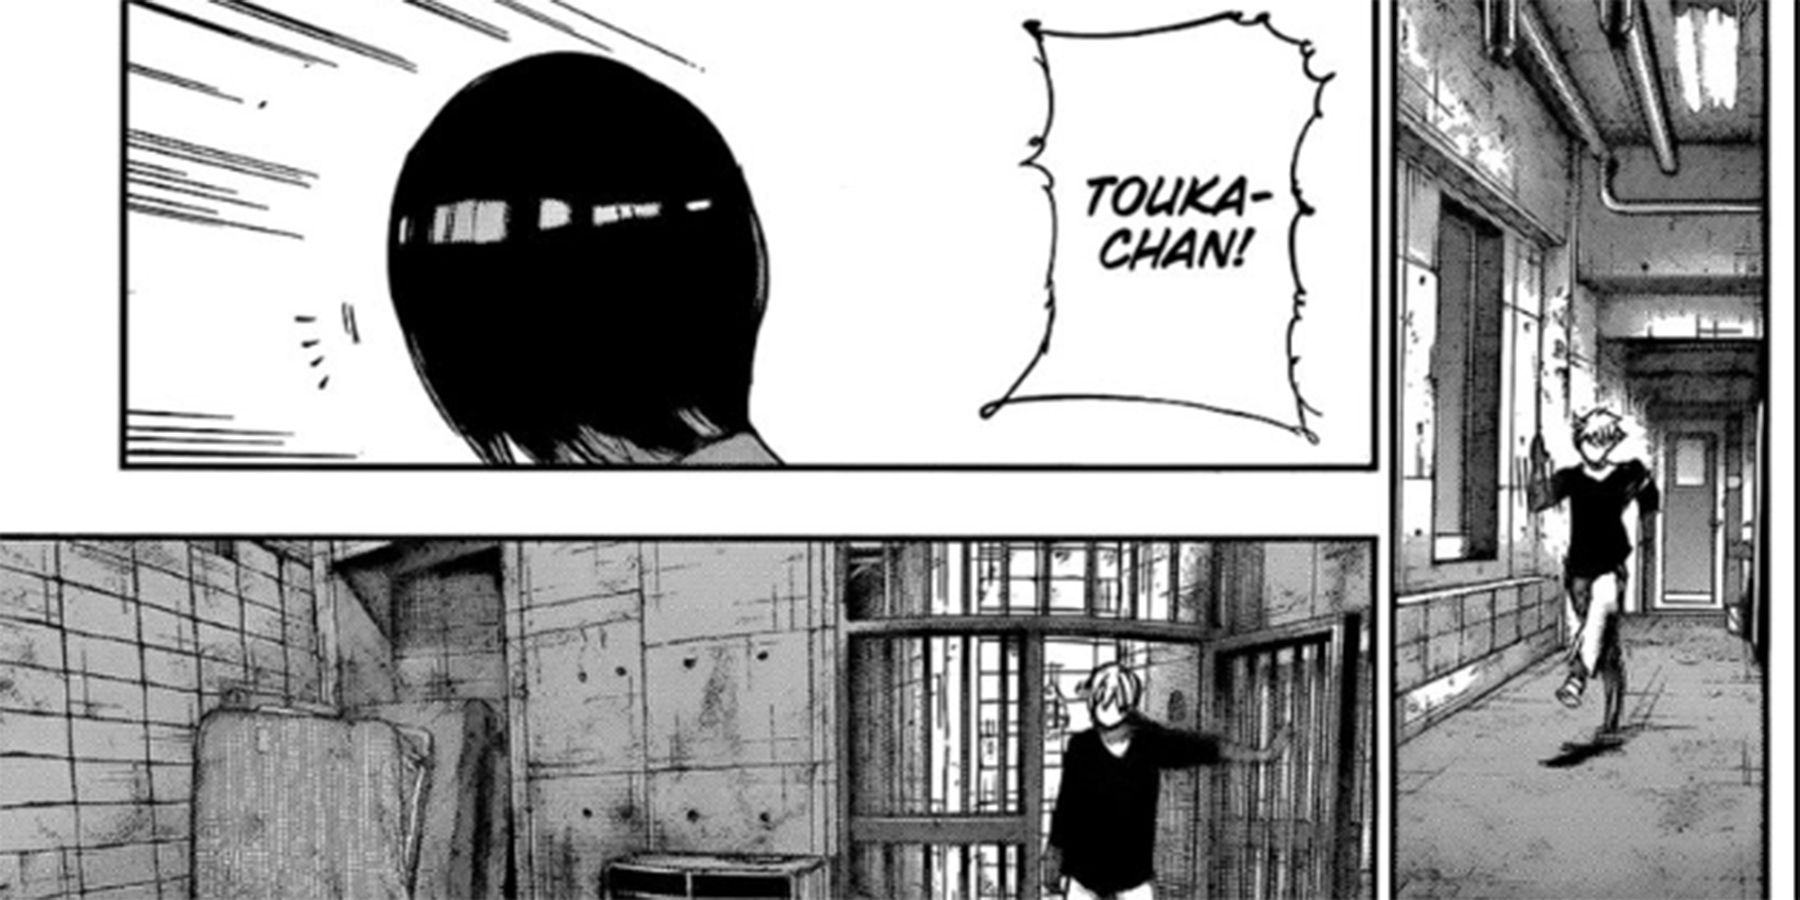 Tokyo Ghoul: The Biggest Differences Between The Anime & Manga